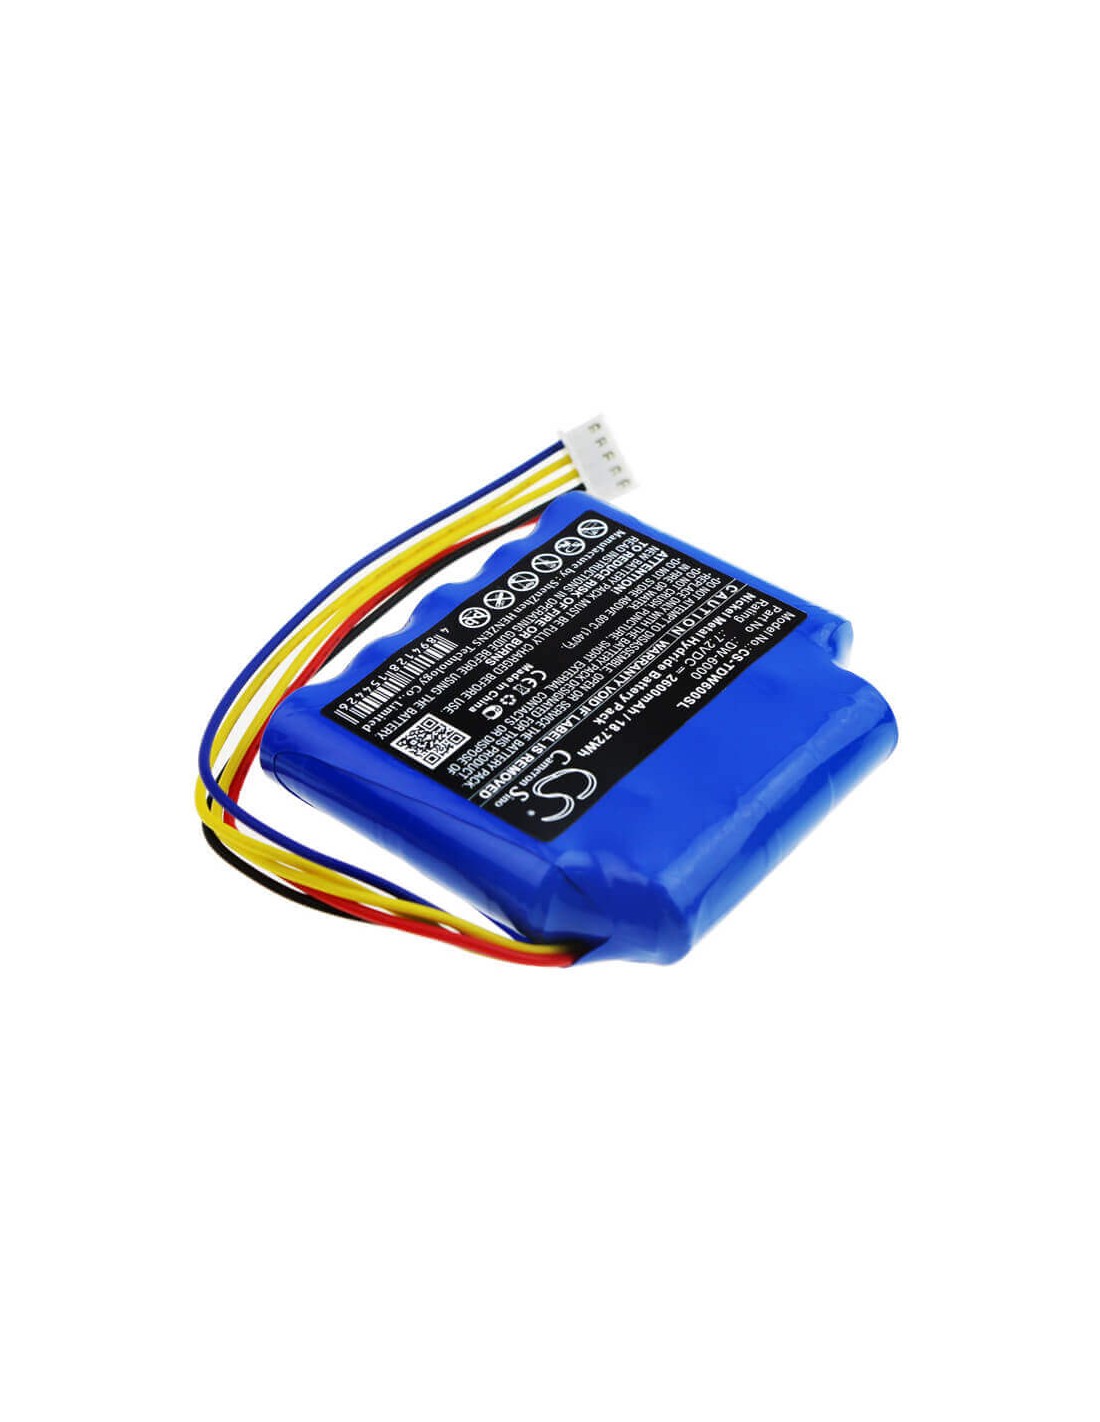 Battery for Tosight, Dw-6000, Dwk-6000 7.2V, 2600mAh - 18.72Wh